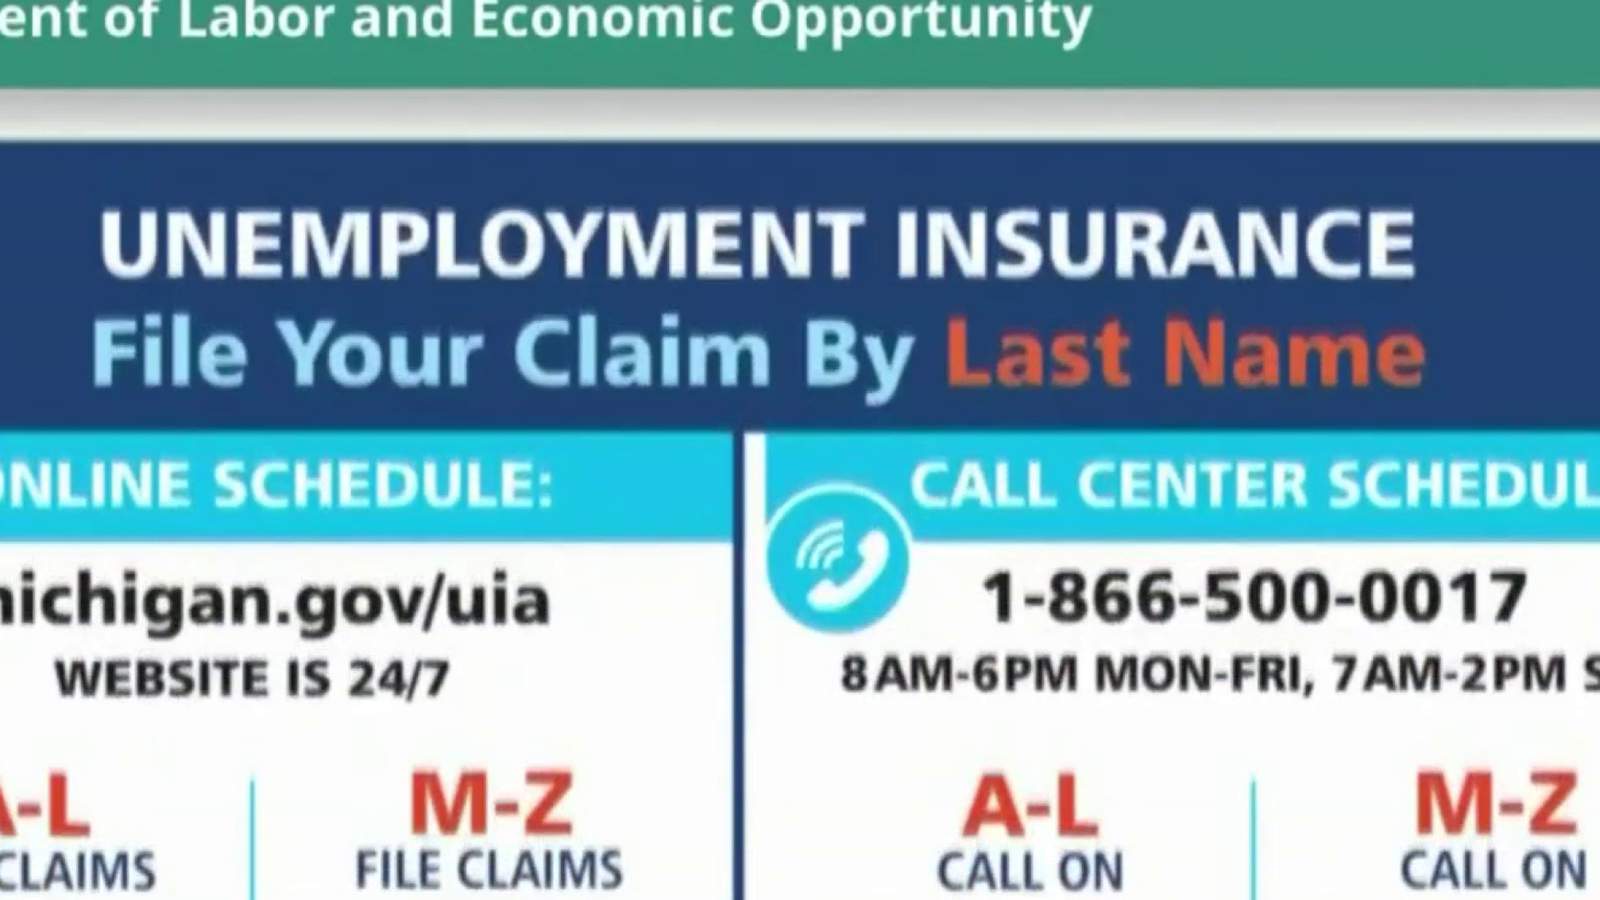 New scam steals personal information to file false unemployment claims